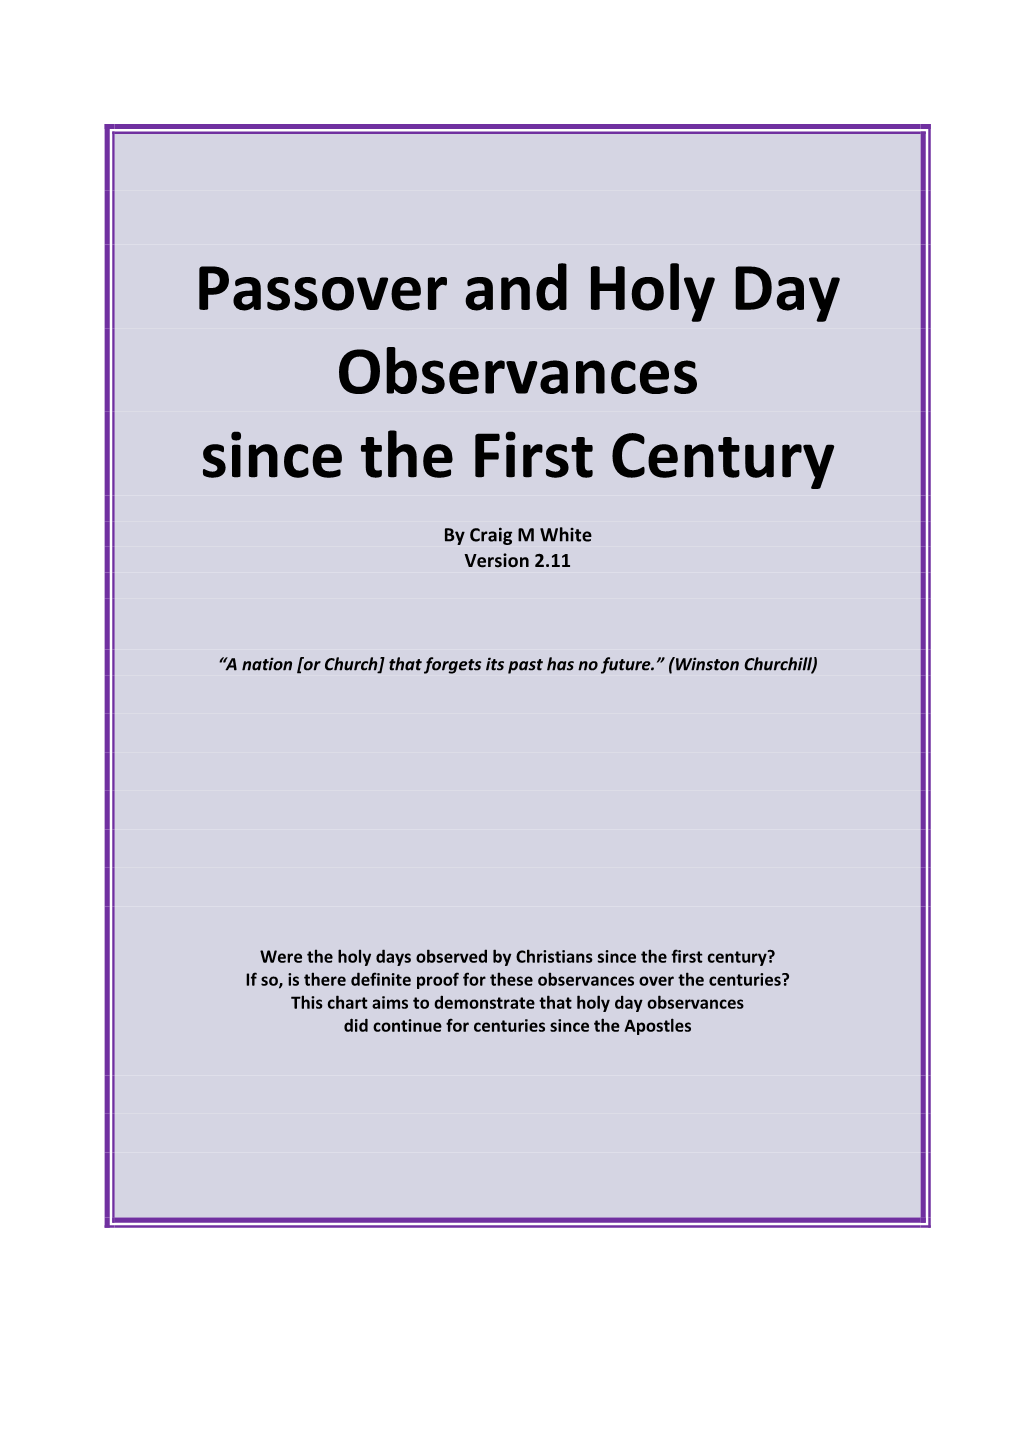 Passover and Holy Day Observances Since the First Century